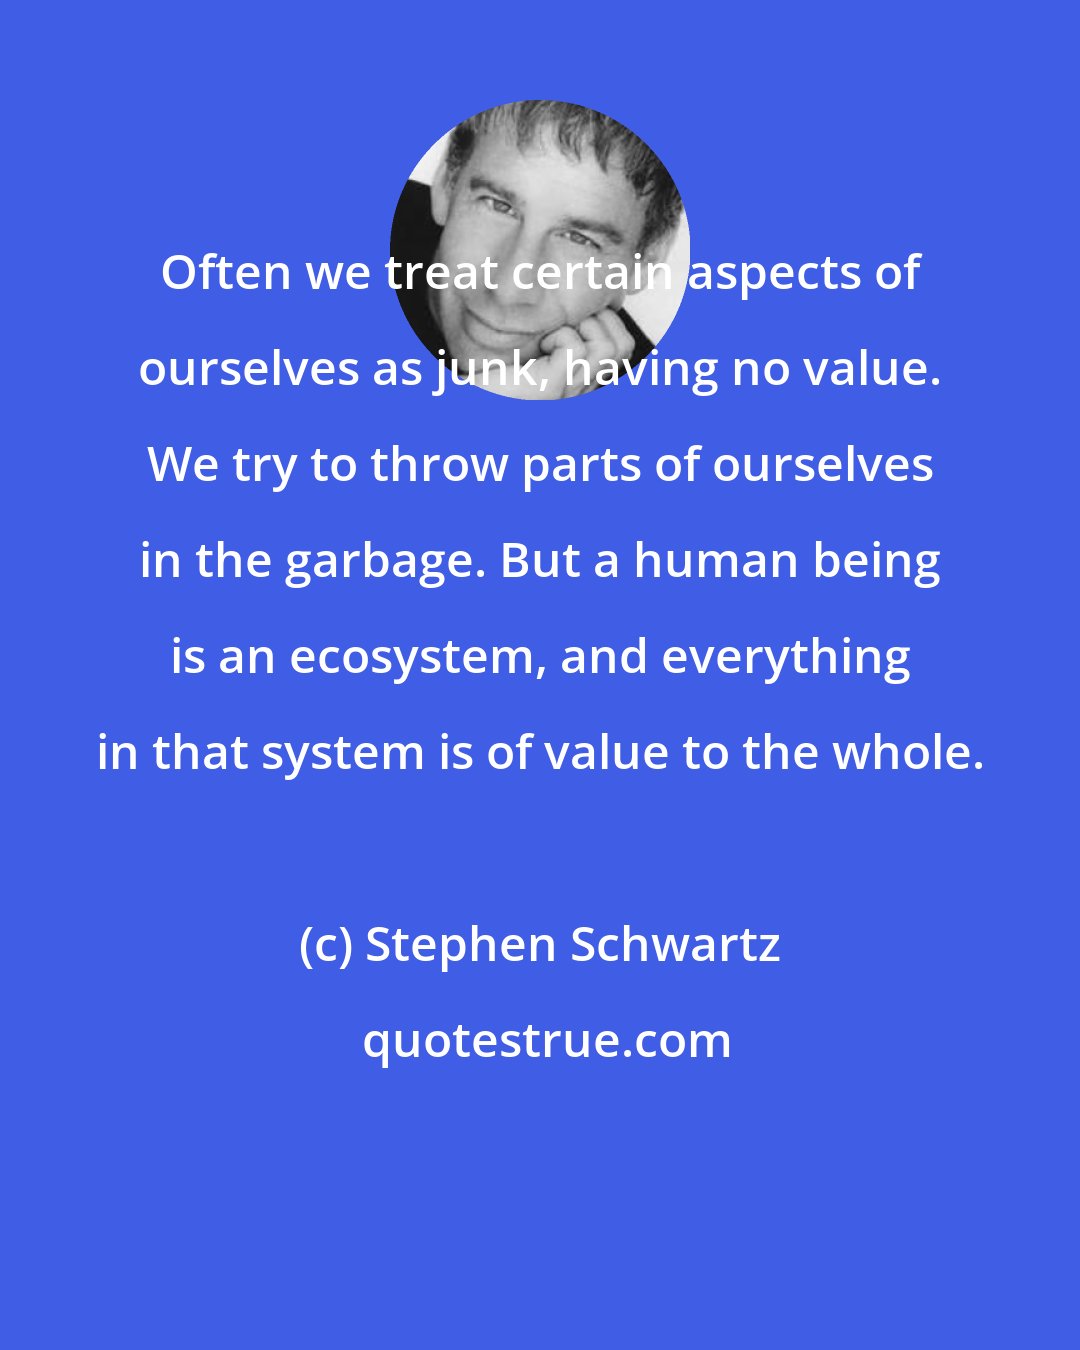 Stephen Schwartz: Often we treat certain aspects of ourselves as junk, having no value. We try to throw parts of ourselves in the garbage. But a human being is an ecosystem, and everything in that system is of value to the whole.